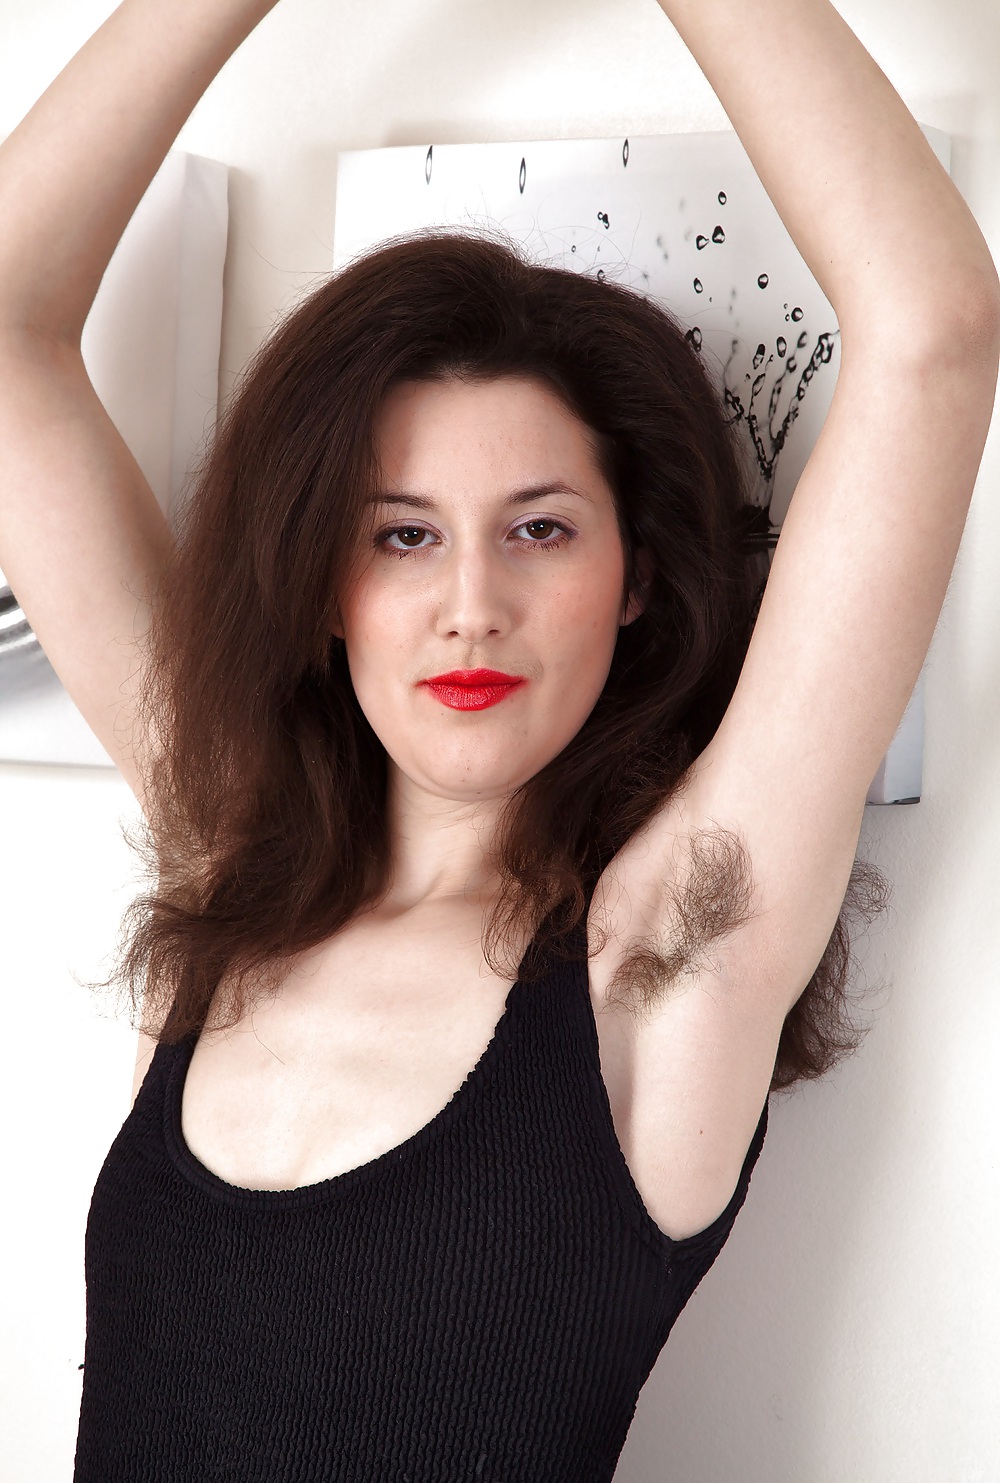 Miscellaneous girls showing hairy, unshaven armpits 3 #36174398